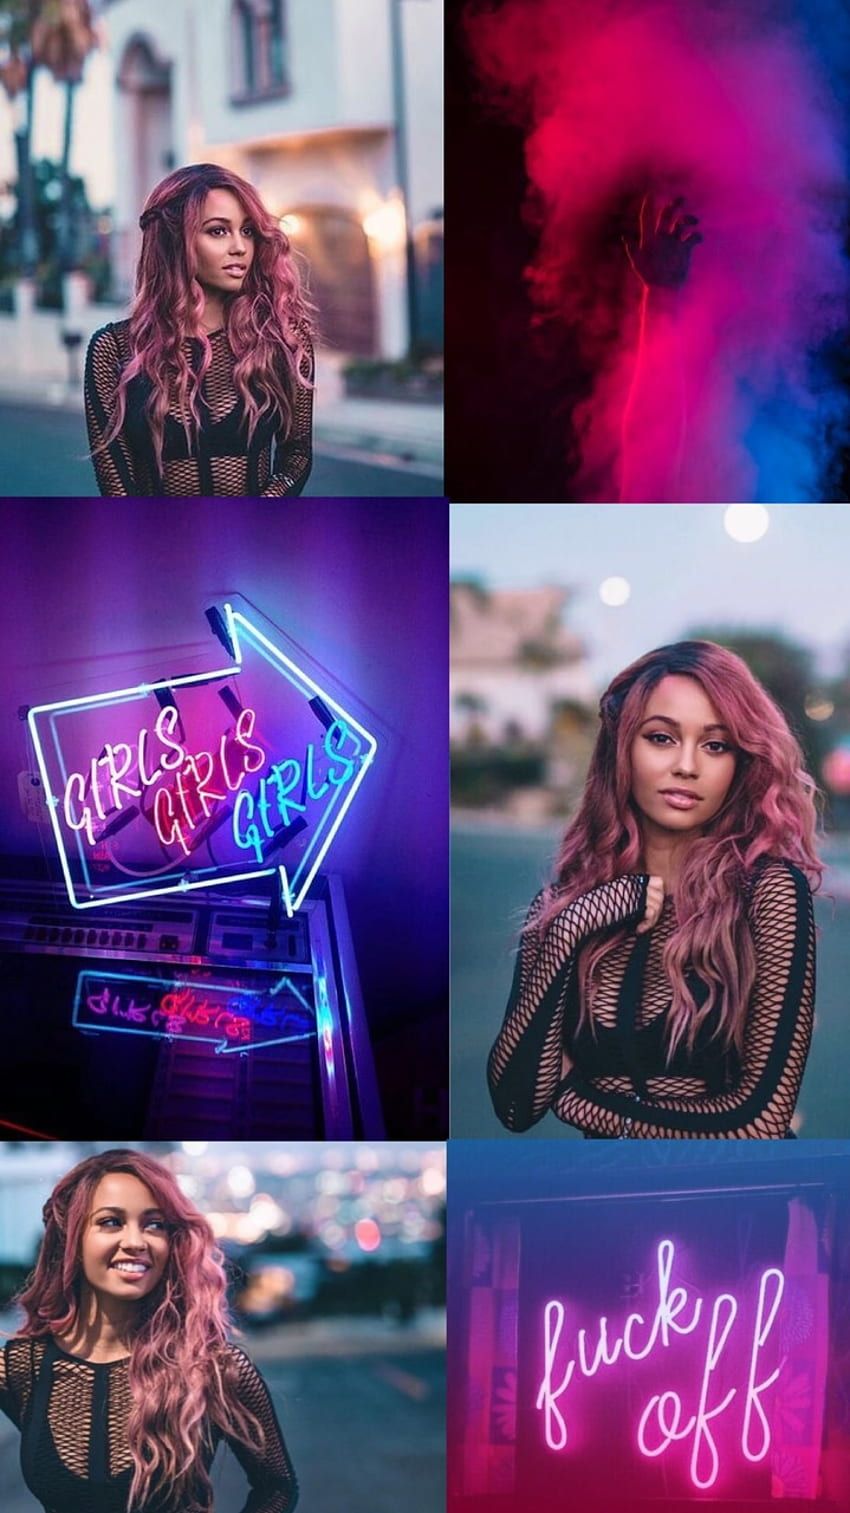 Aesthetic phone background of a woman with pink hair - Riverdale